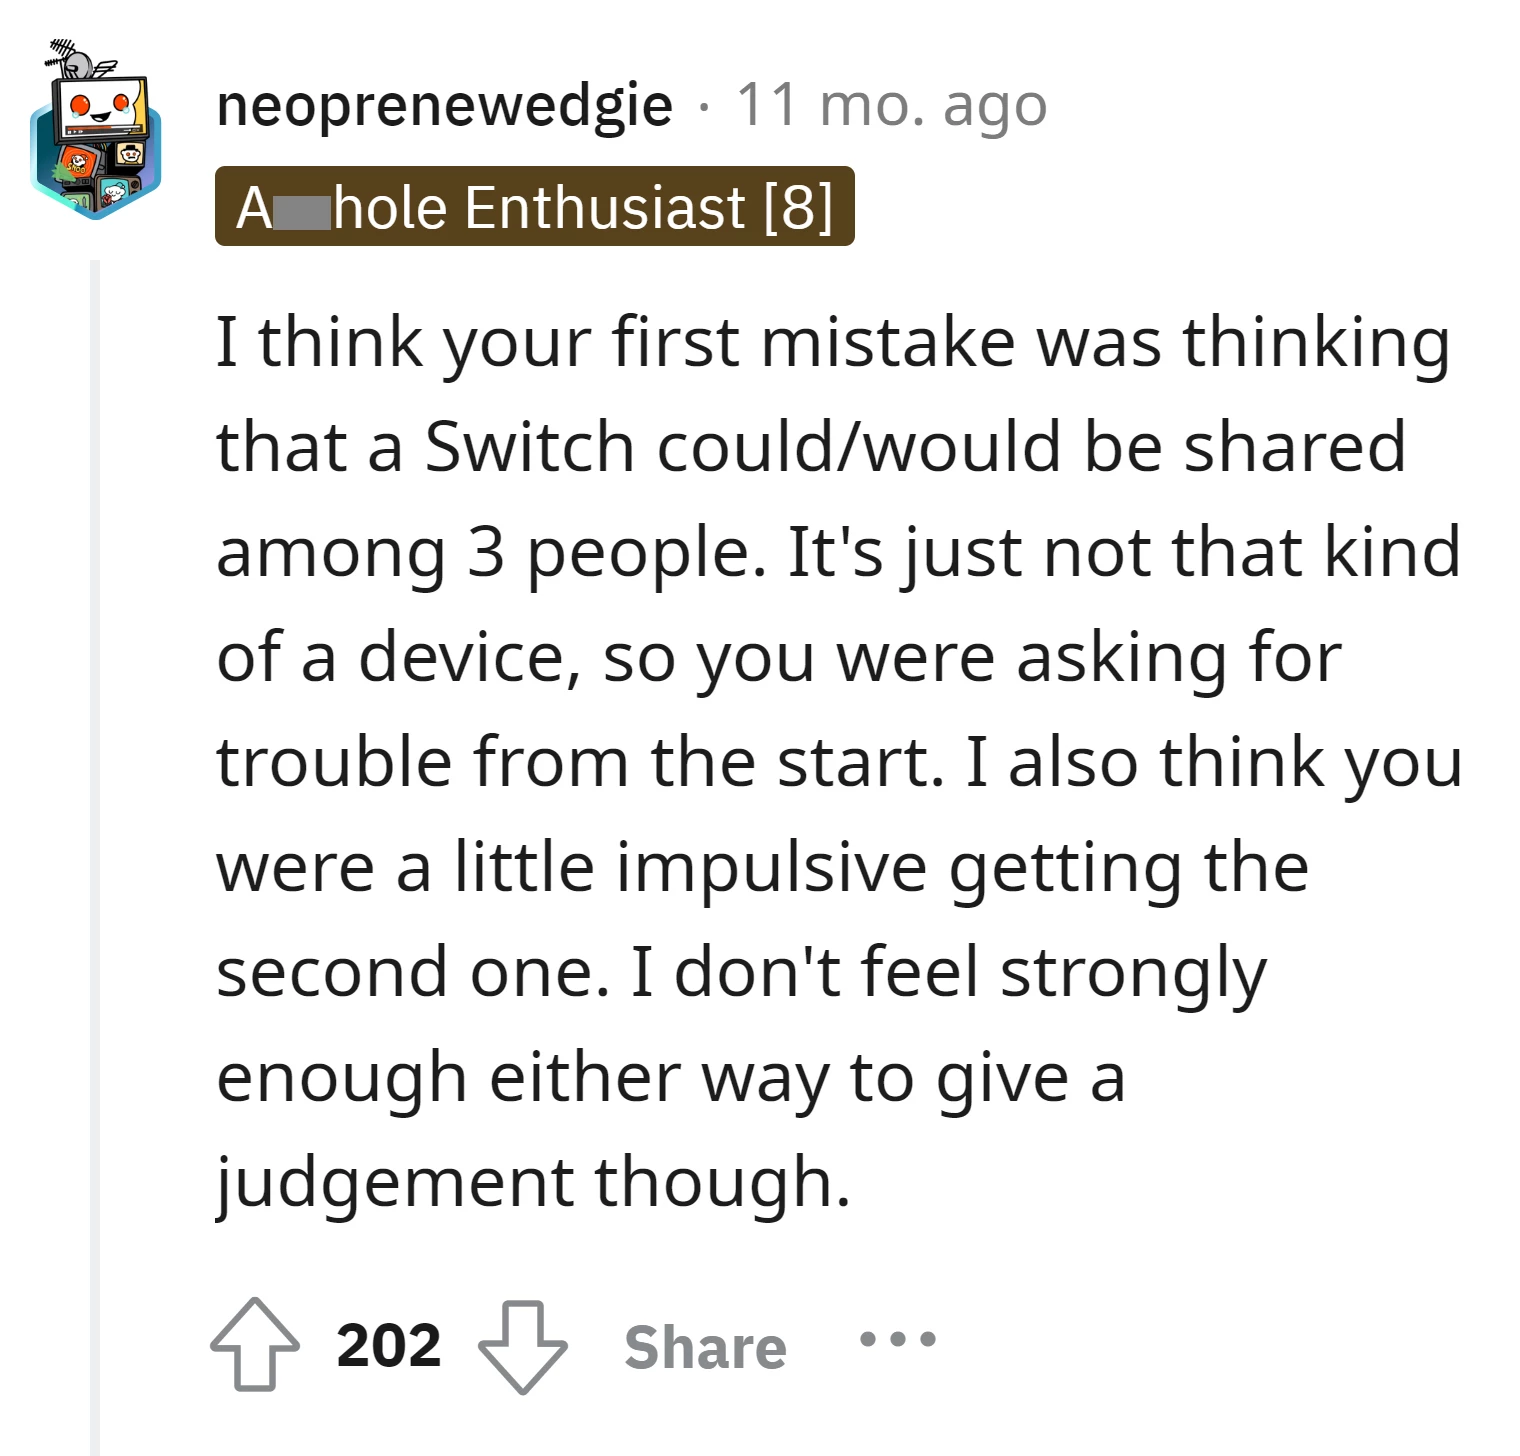 The OP's first mistake was expecting a Nintendo Switch to be shared among three people